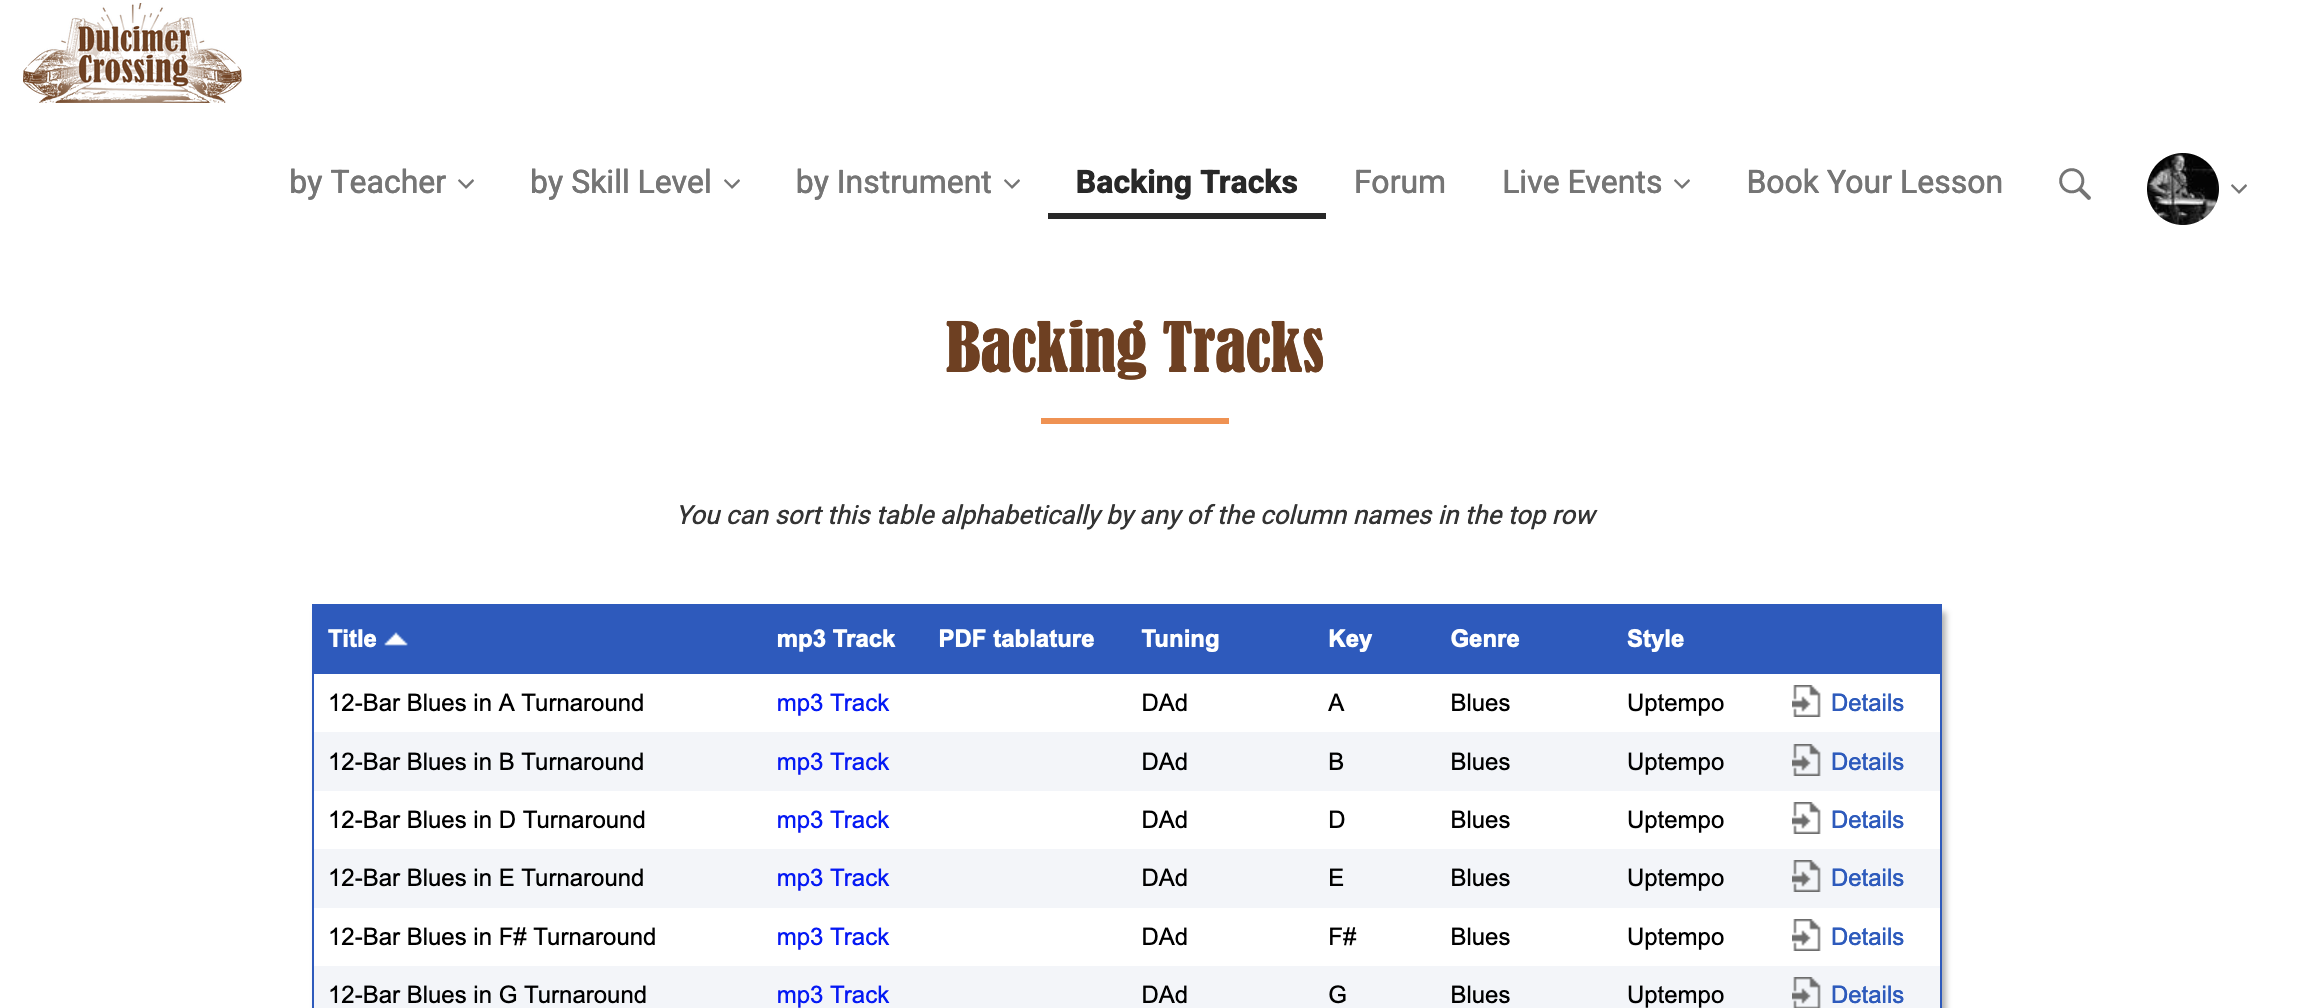 New Blues Backing Tracks added to the Library